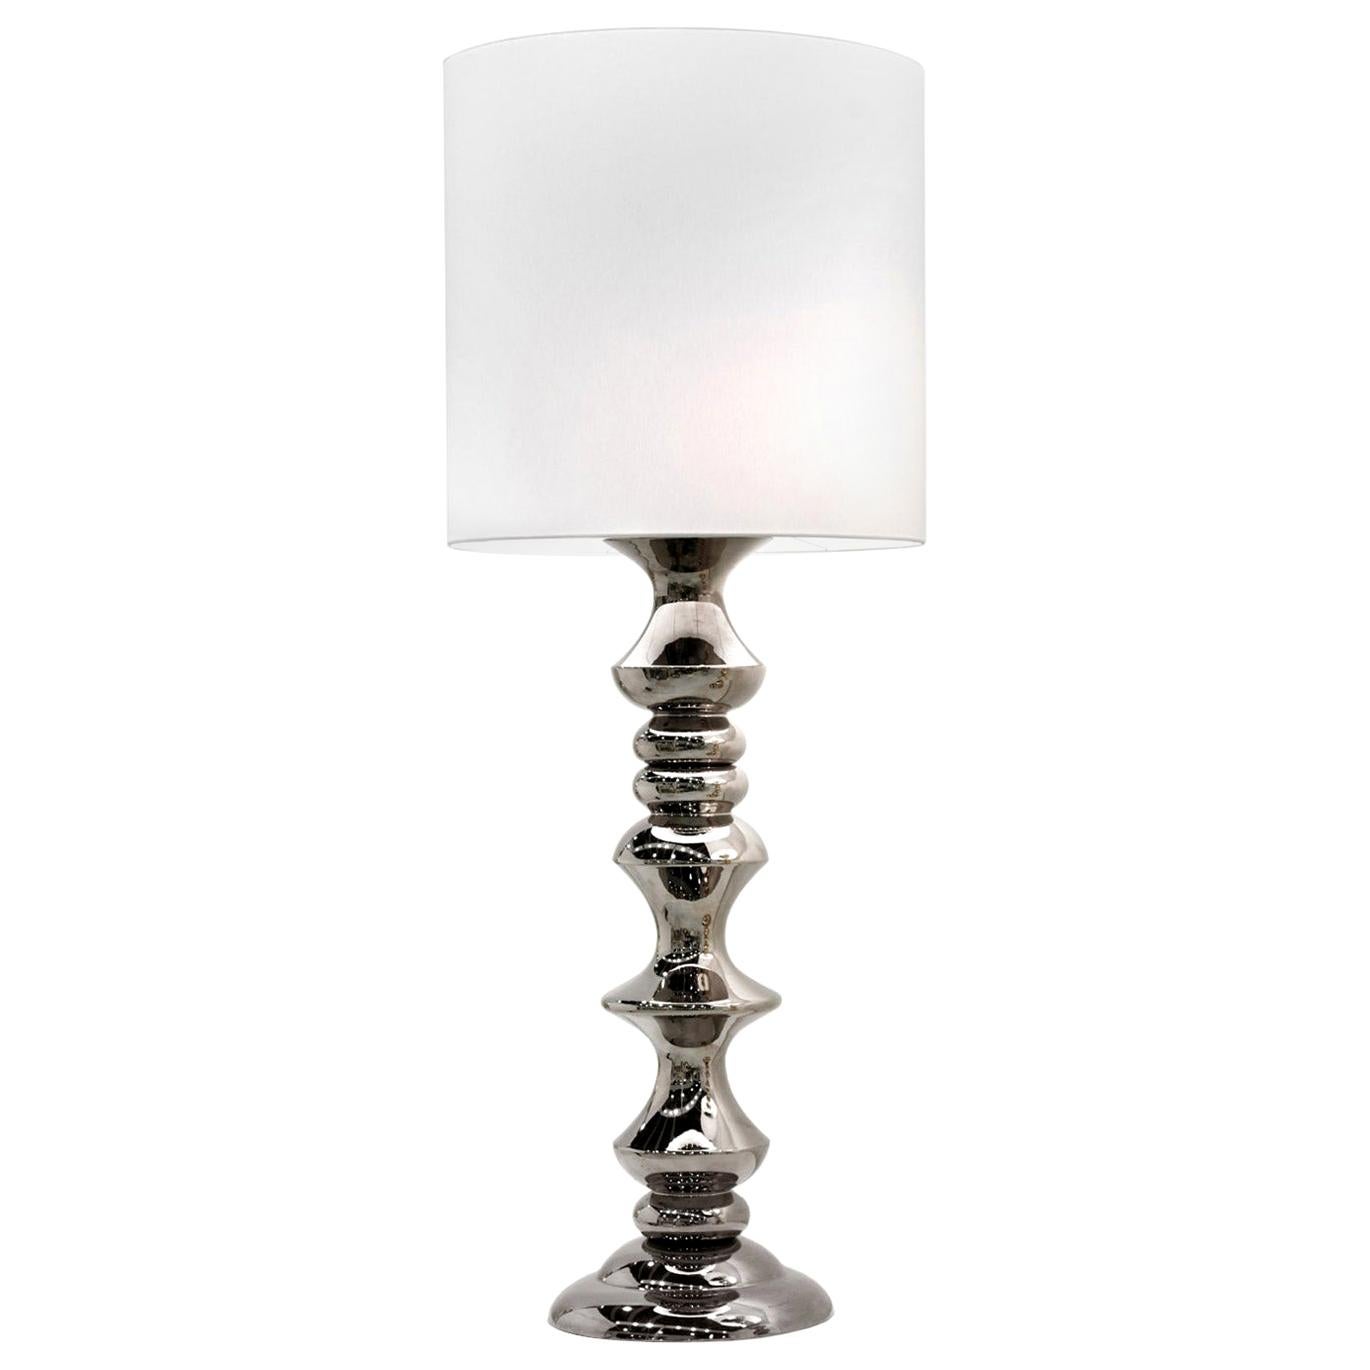 Ceramic Lamp "MIDA 3" Handcrafted in Platinum by Gabriella B., Made in Italy For Sale